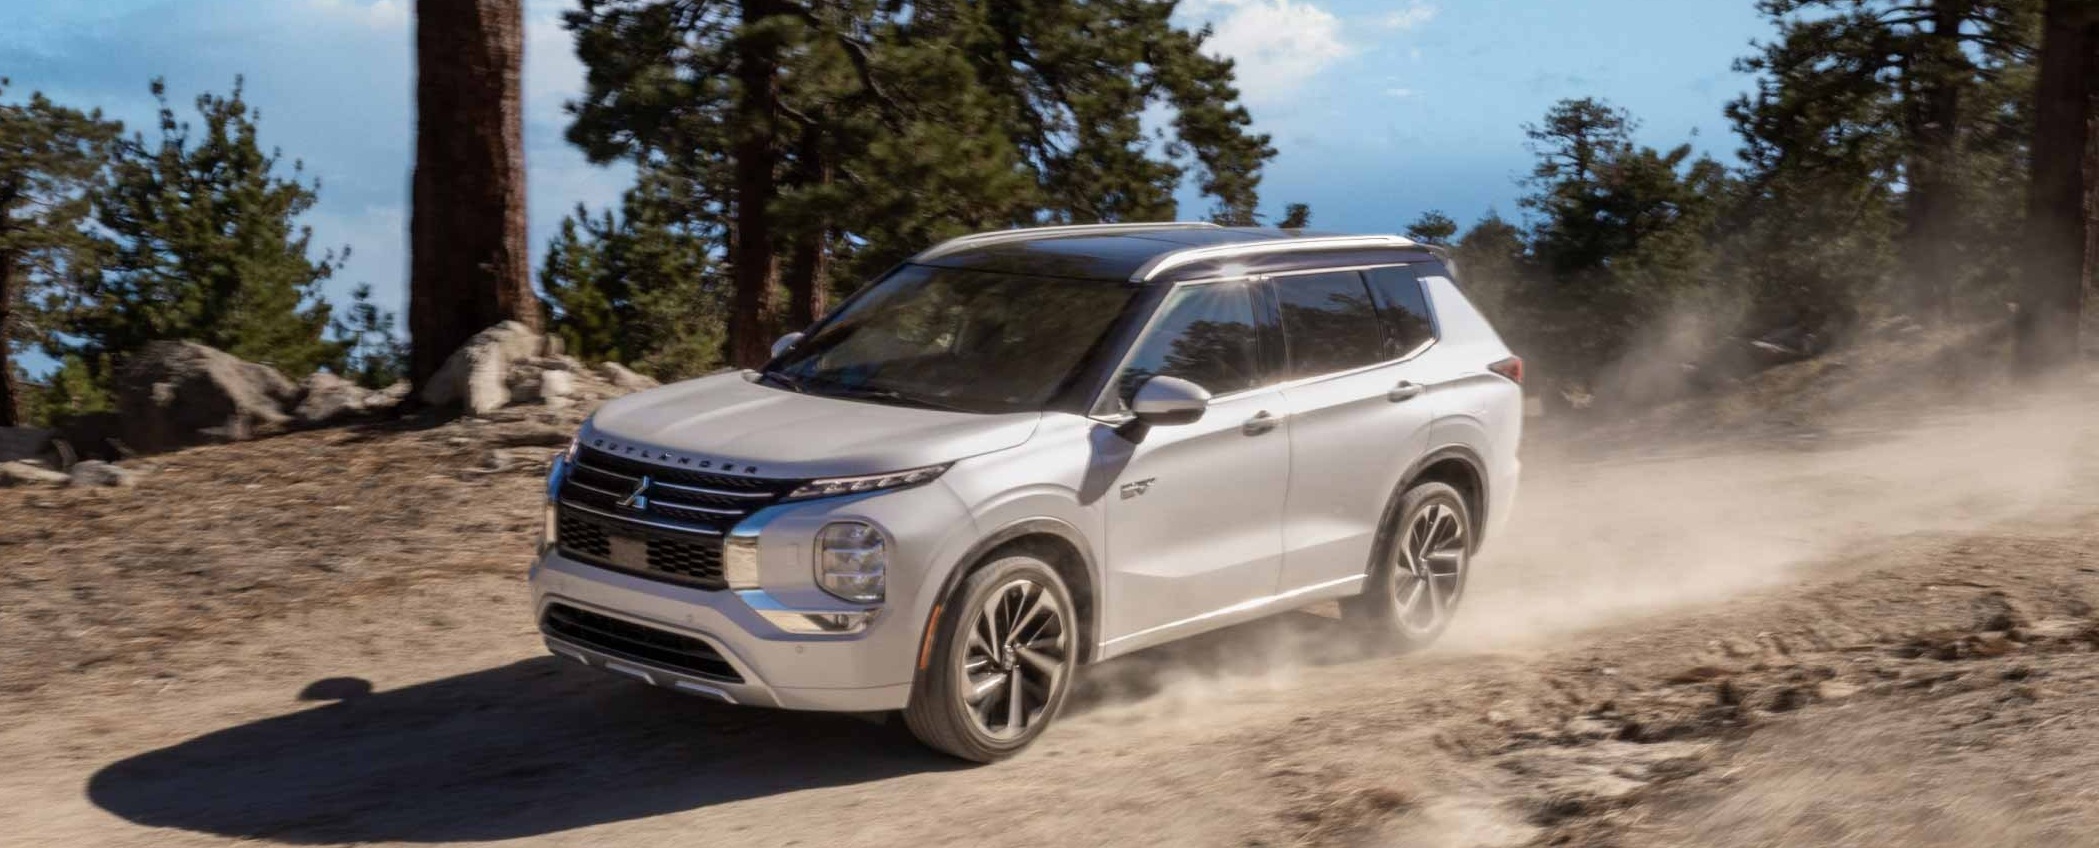 2023 Mitsubishi Outlander Review: A Flexible but Focused SUV With  Outstanding AWD